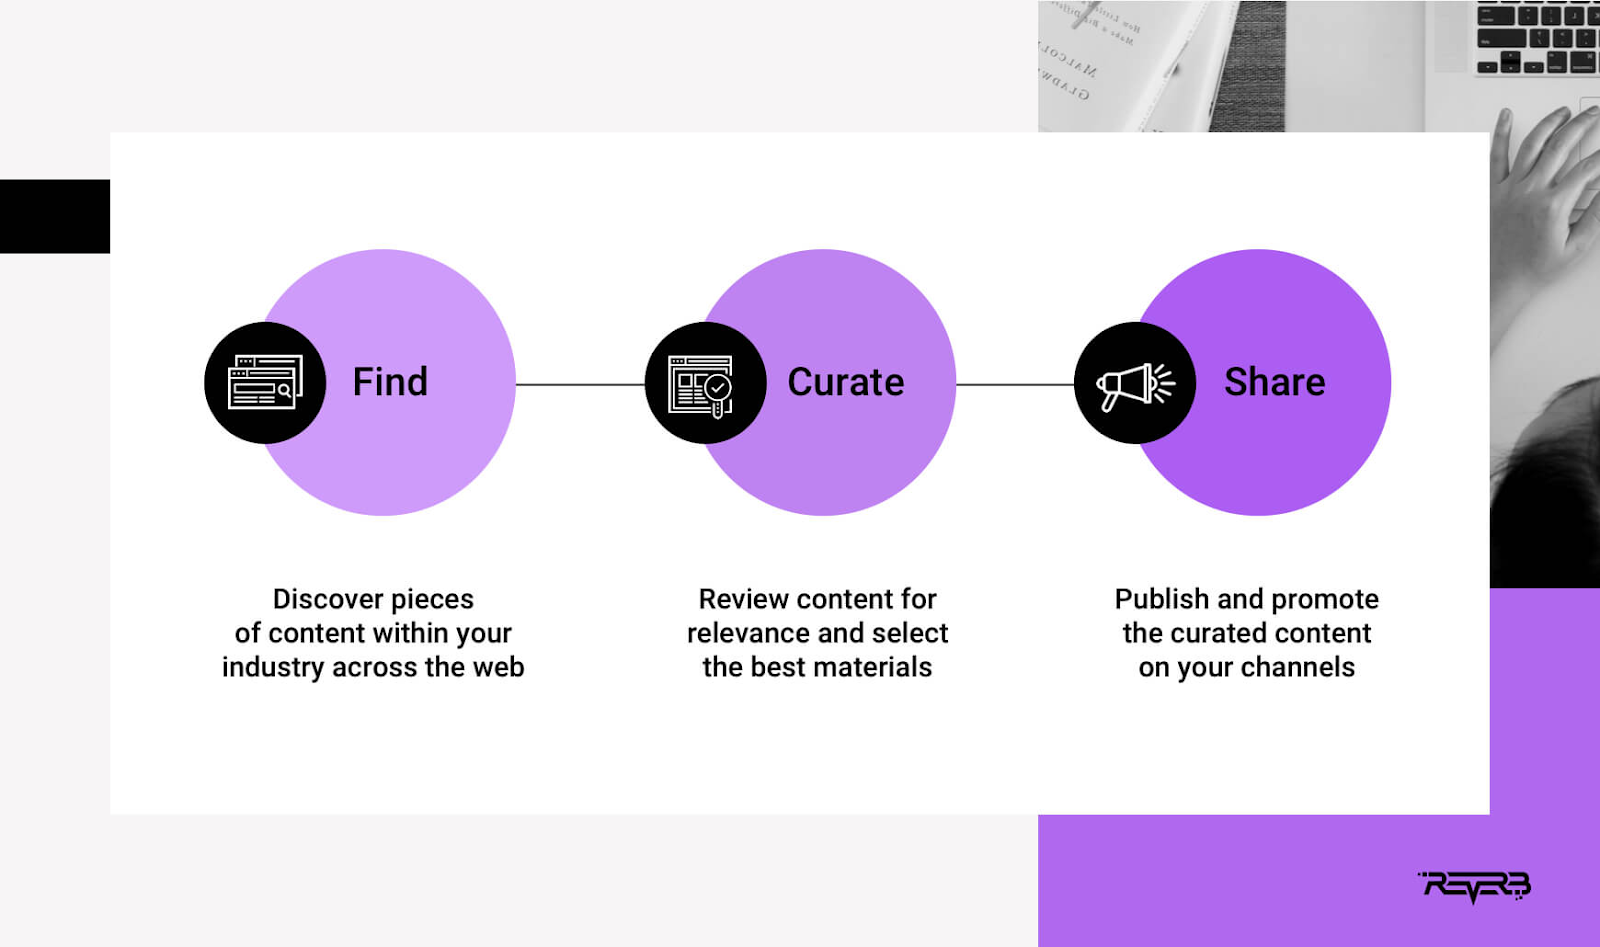 Discover content from your industry, review it for relevance and choose the best, then publish and promote the curated content.